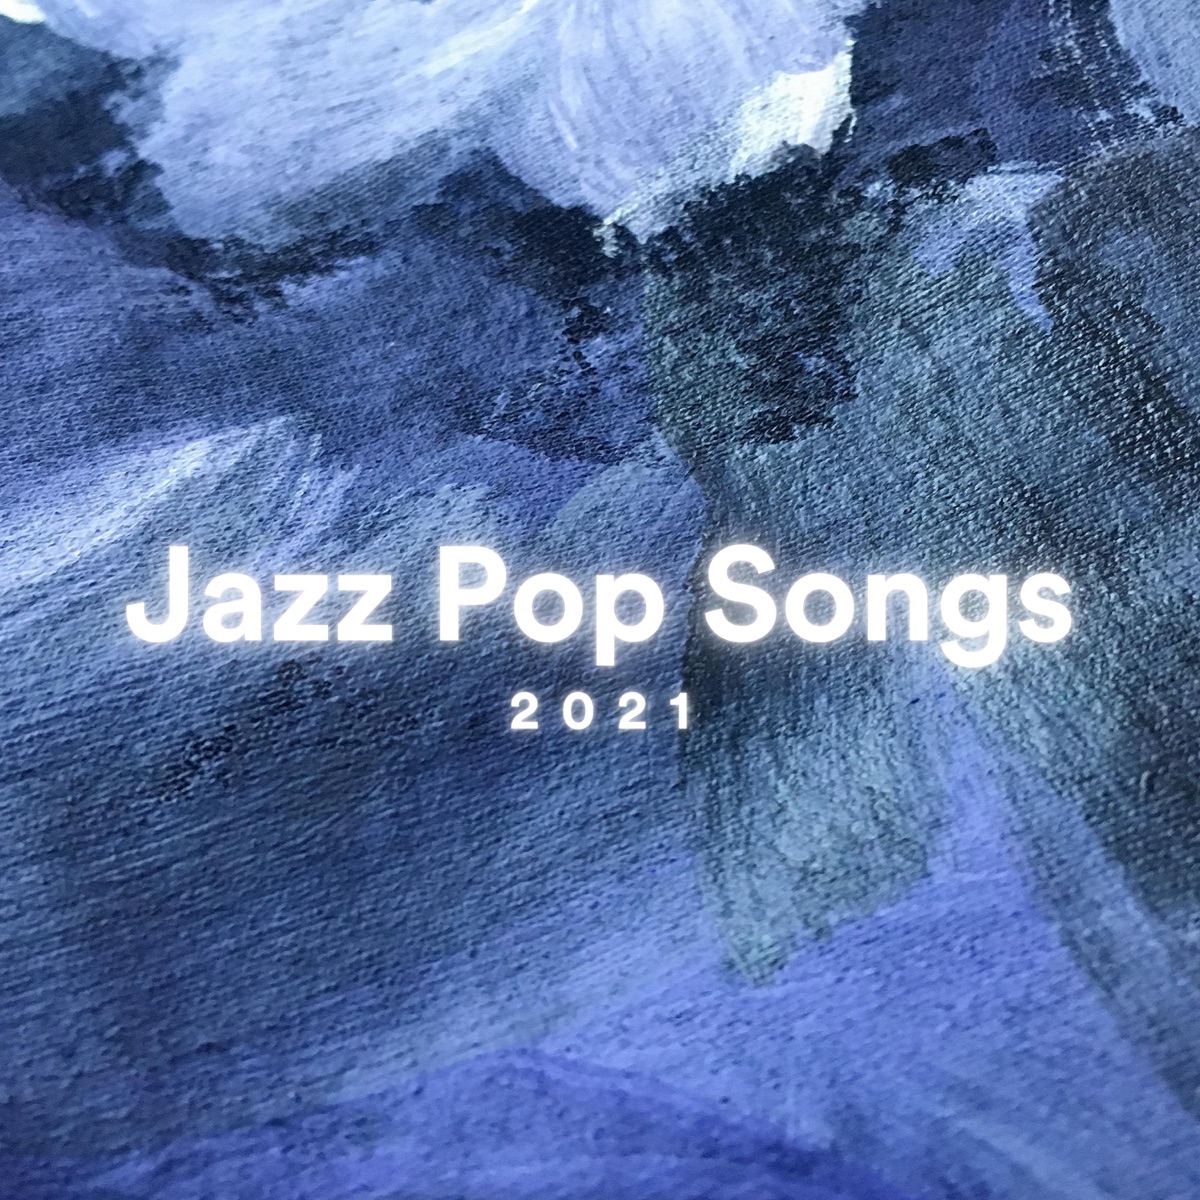 Jazz Pop Songs 2021 by Various Artists on Apple Music